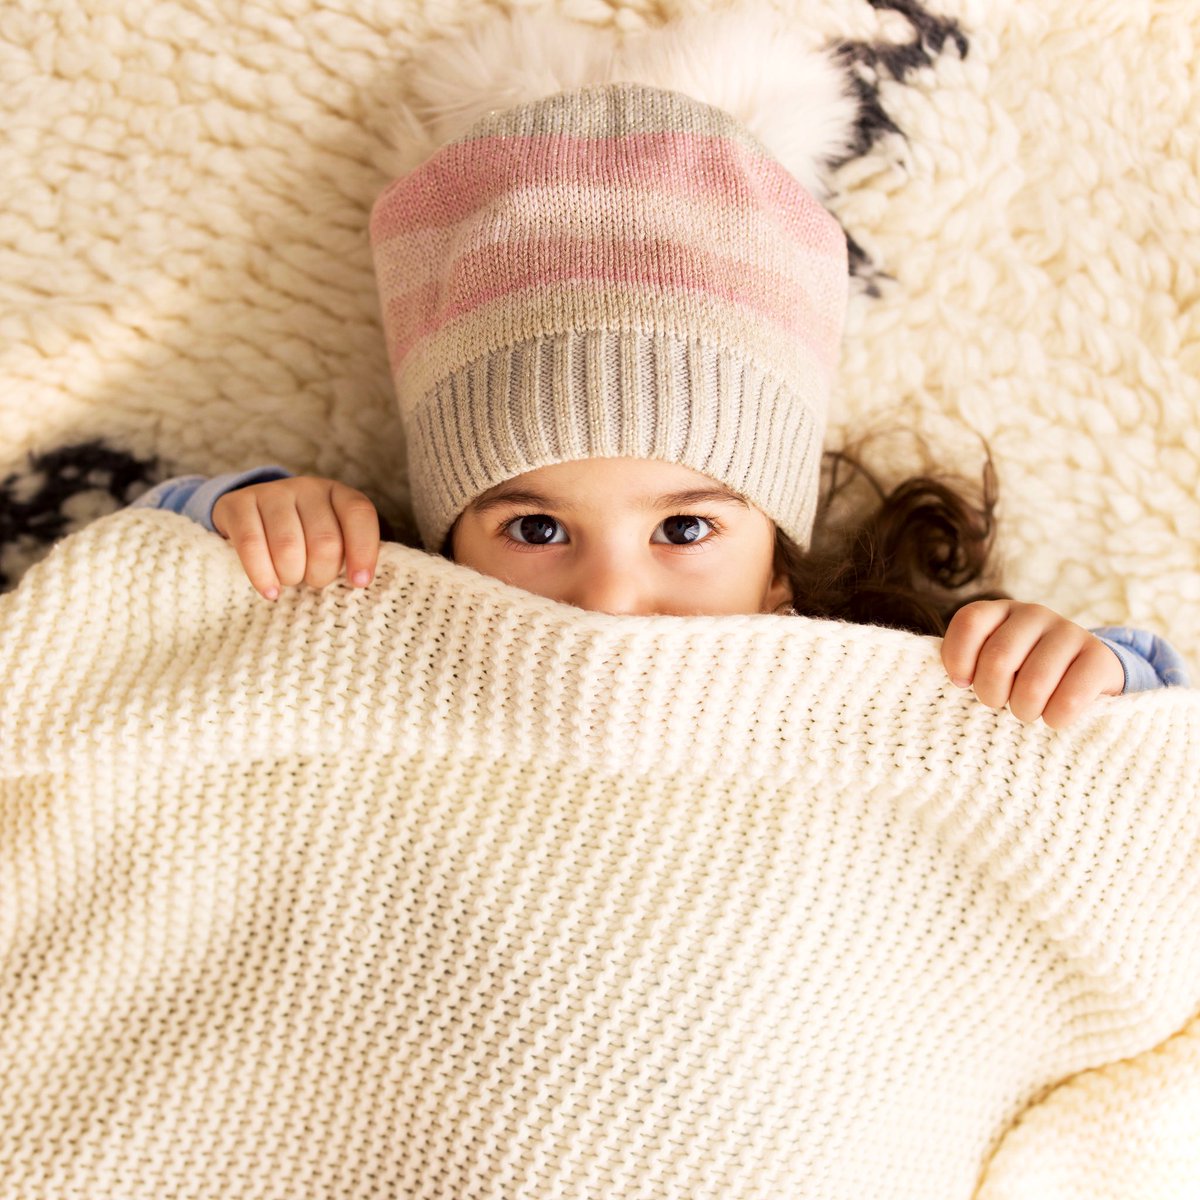 “Fit me with socks,
and a fluffy sweatshirt.
Give me a blanket,
and some hot cocoa.
Tuck in with me
for a warm cuddle
in our winter family huddle.”

#winterbaby #babycare #maate #truetomotherhood #babynaturalproducts #nature #natureandnurture